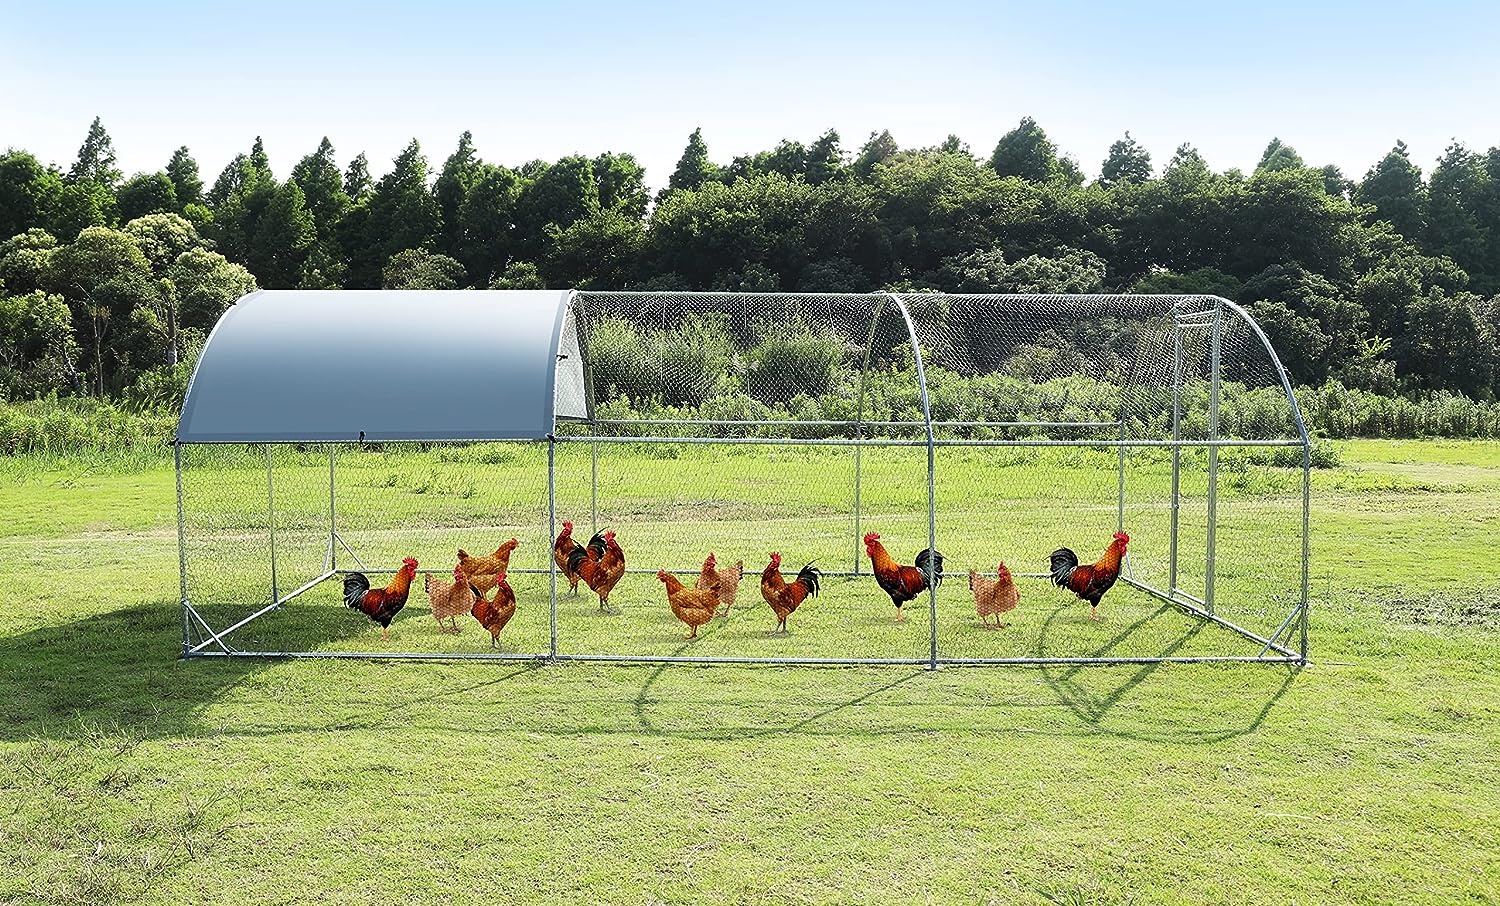 19 FT Large Metal Chicken Coop Walk-in Dome Poultry Cage Hen Run House Rabbits Habitat Cage with Cover Chicken Coops Ease2day